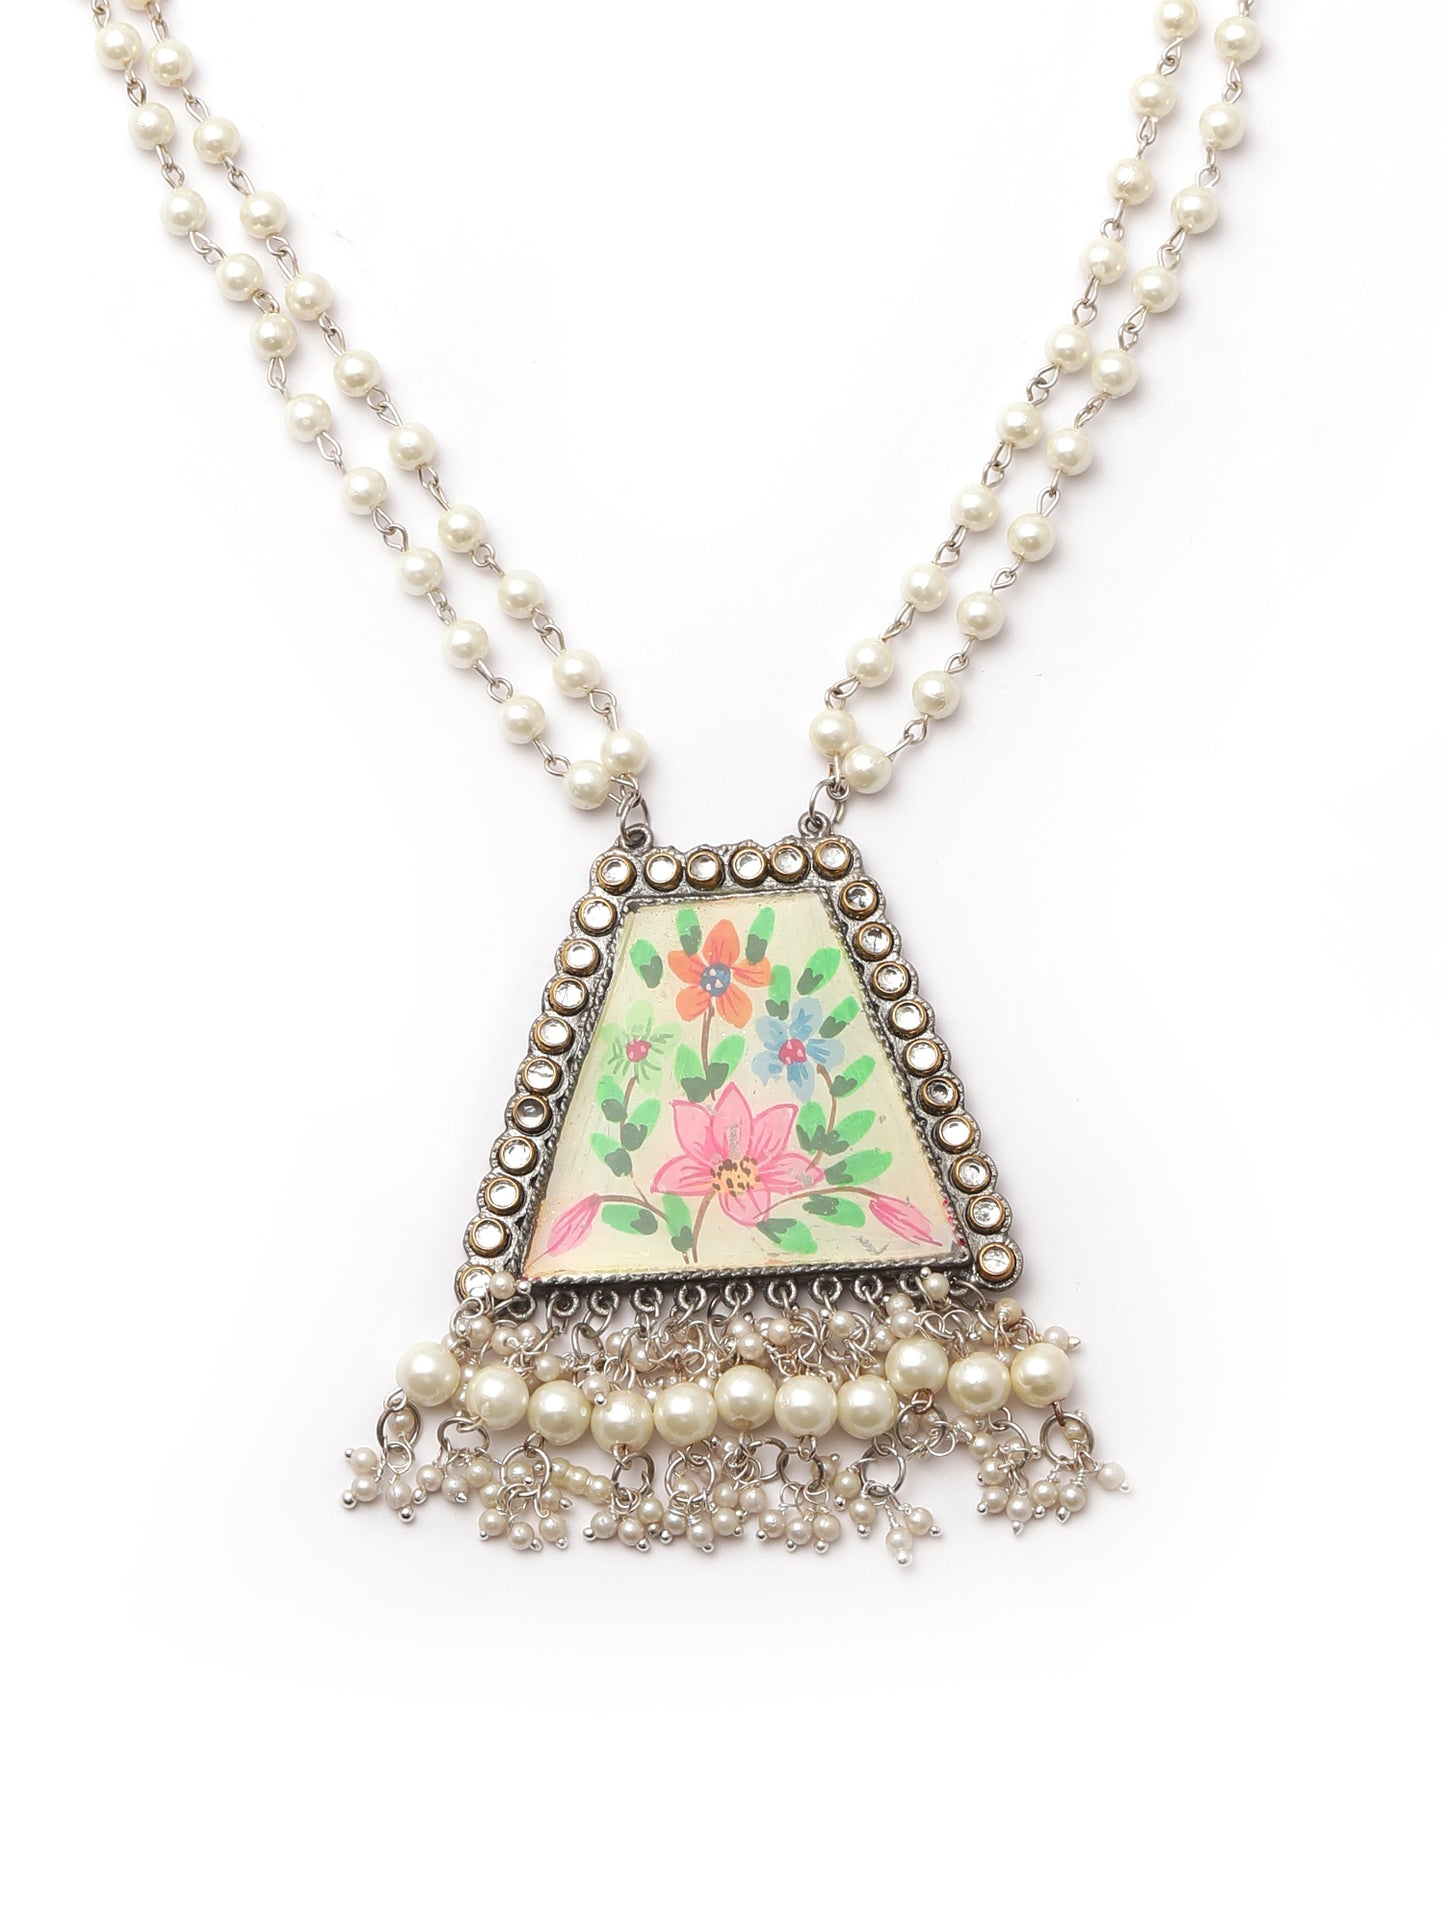 The Pearly Hand Painted Floriated Necklace